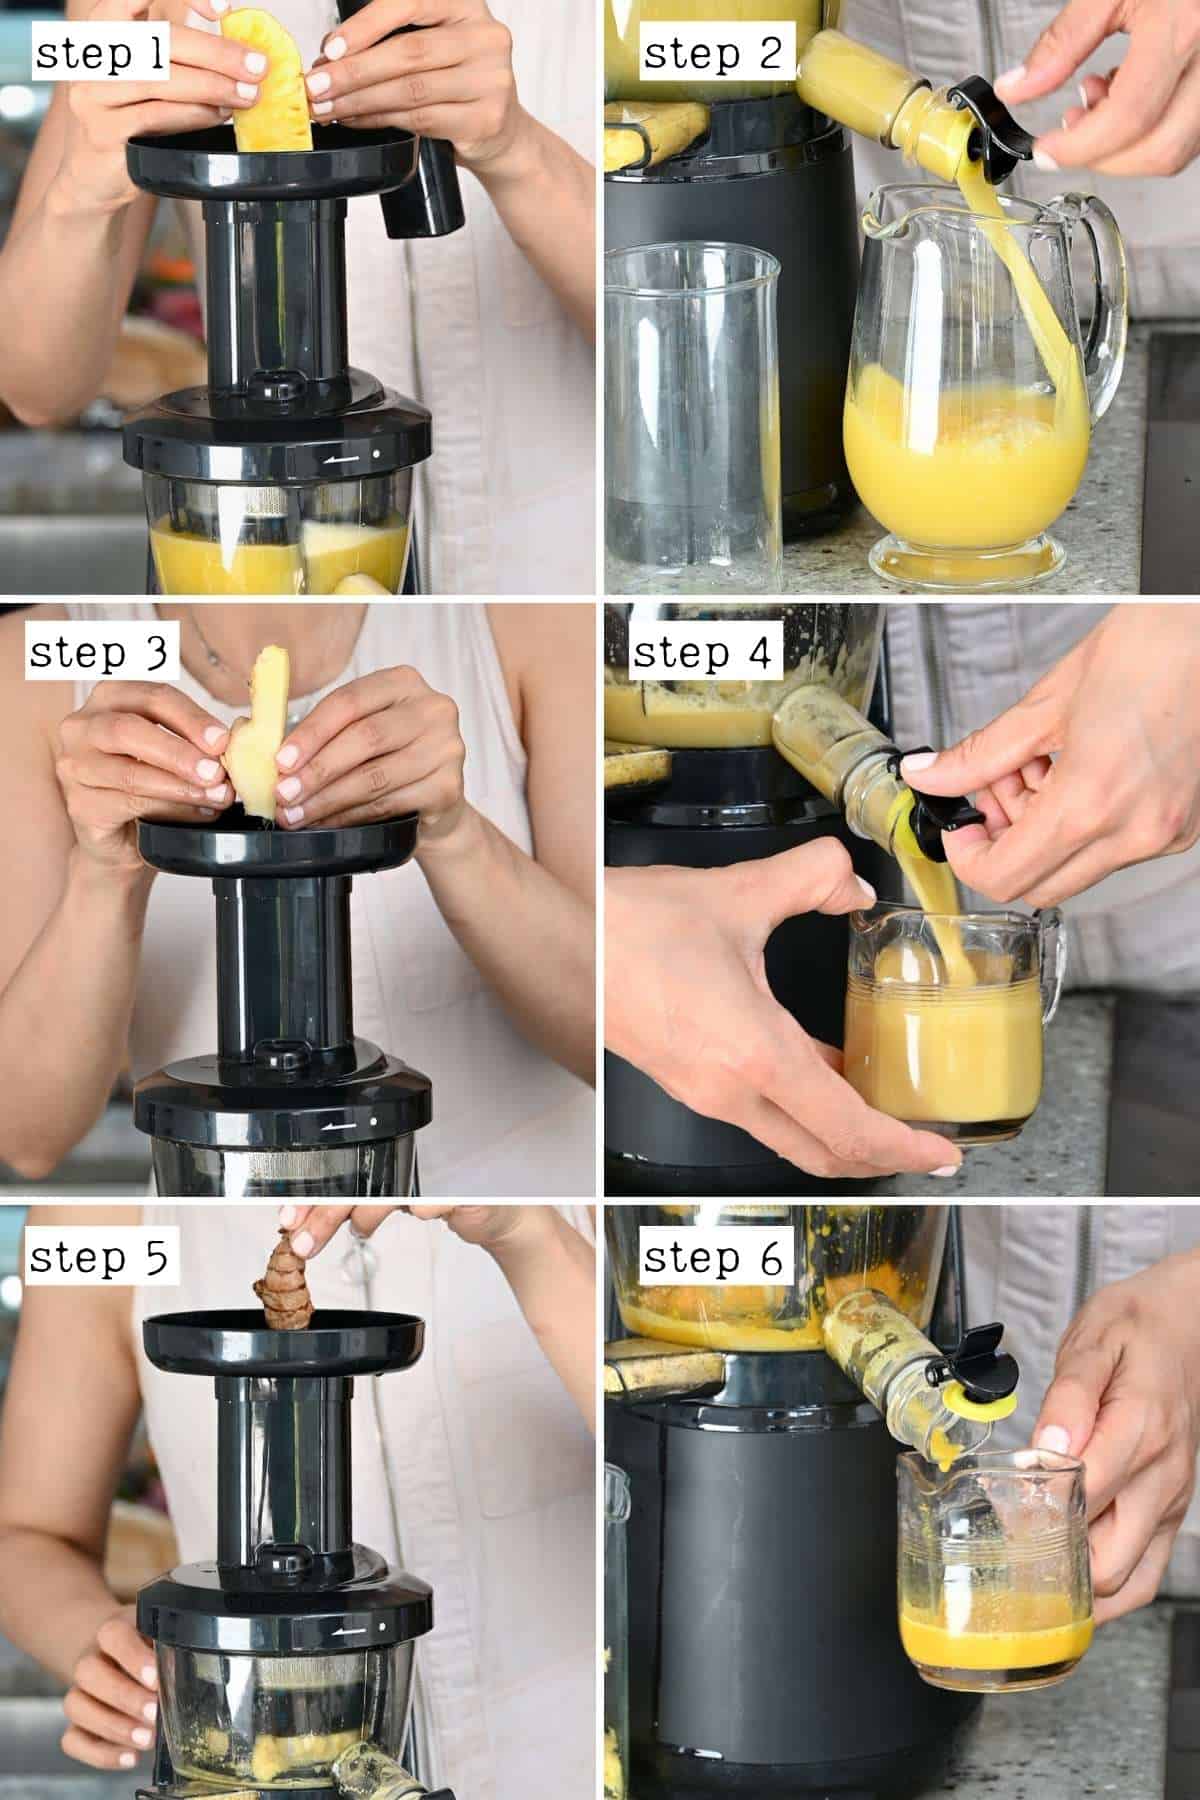 How To Make Pineapple Juice (With or Without Juicer) - Alphafoodie